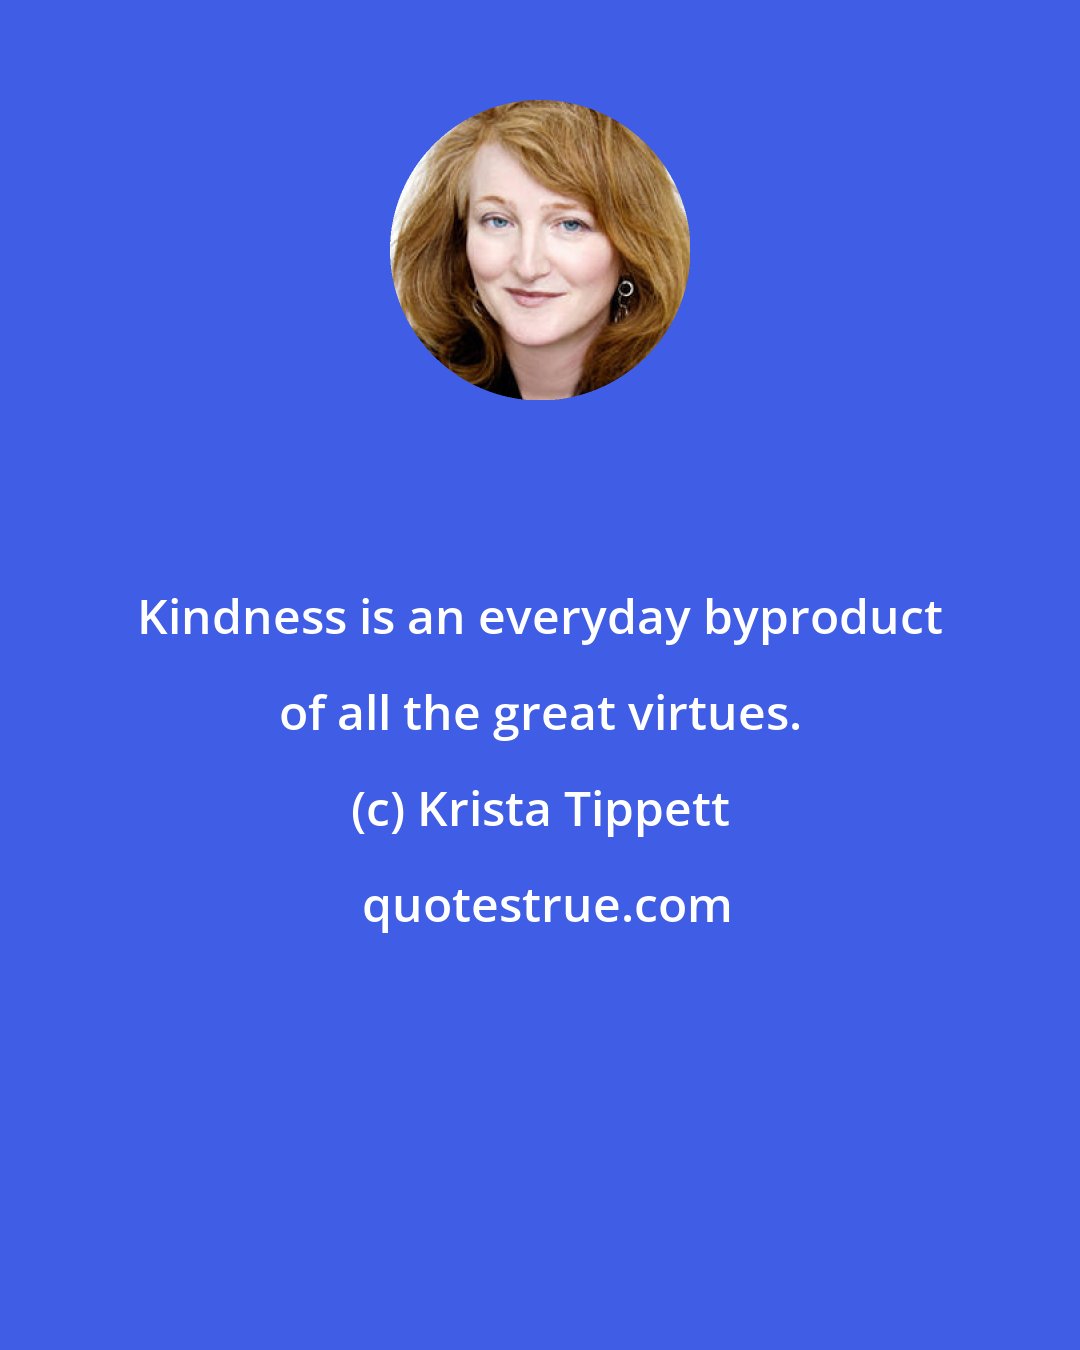 Krista Tippett: Kindness is an everyday byproduct of all the great virtues.